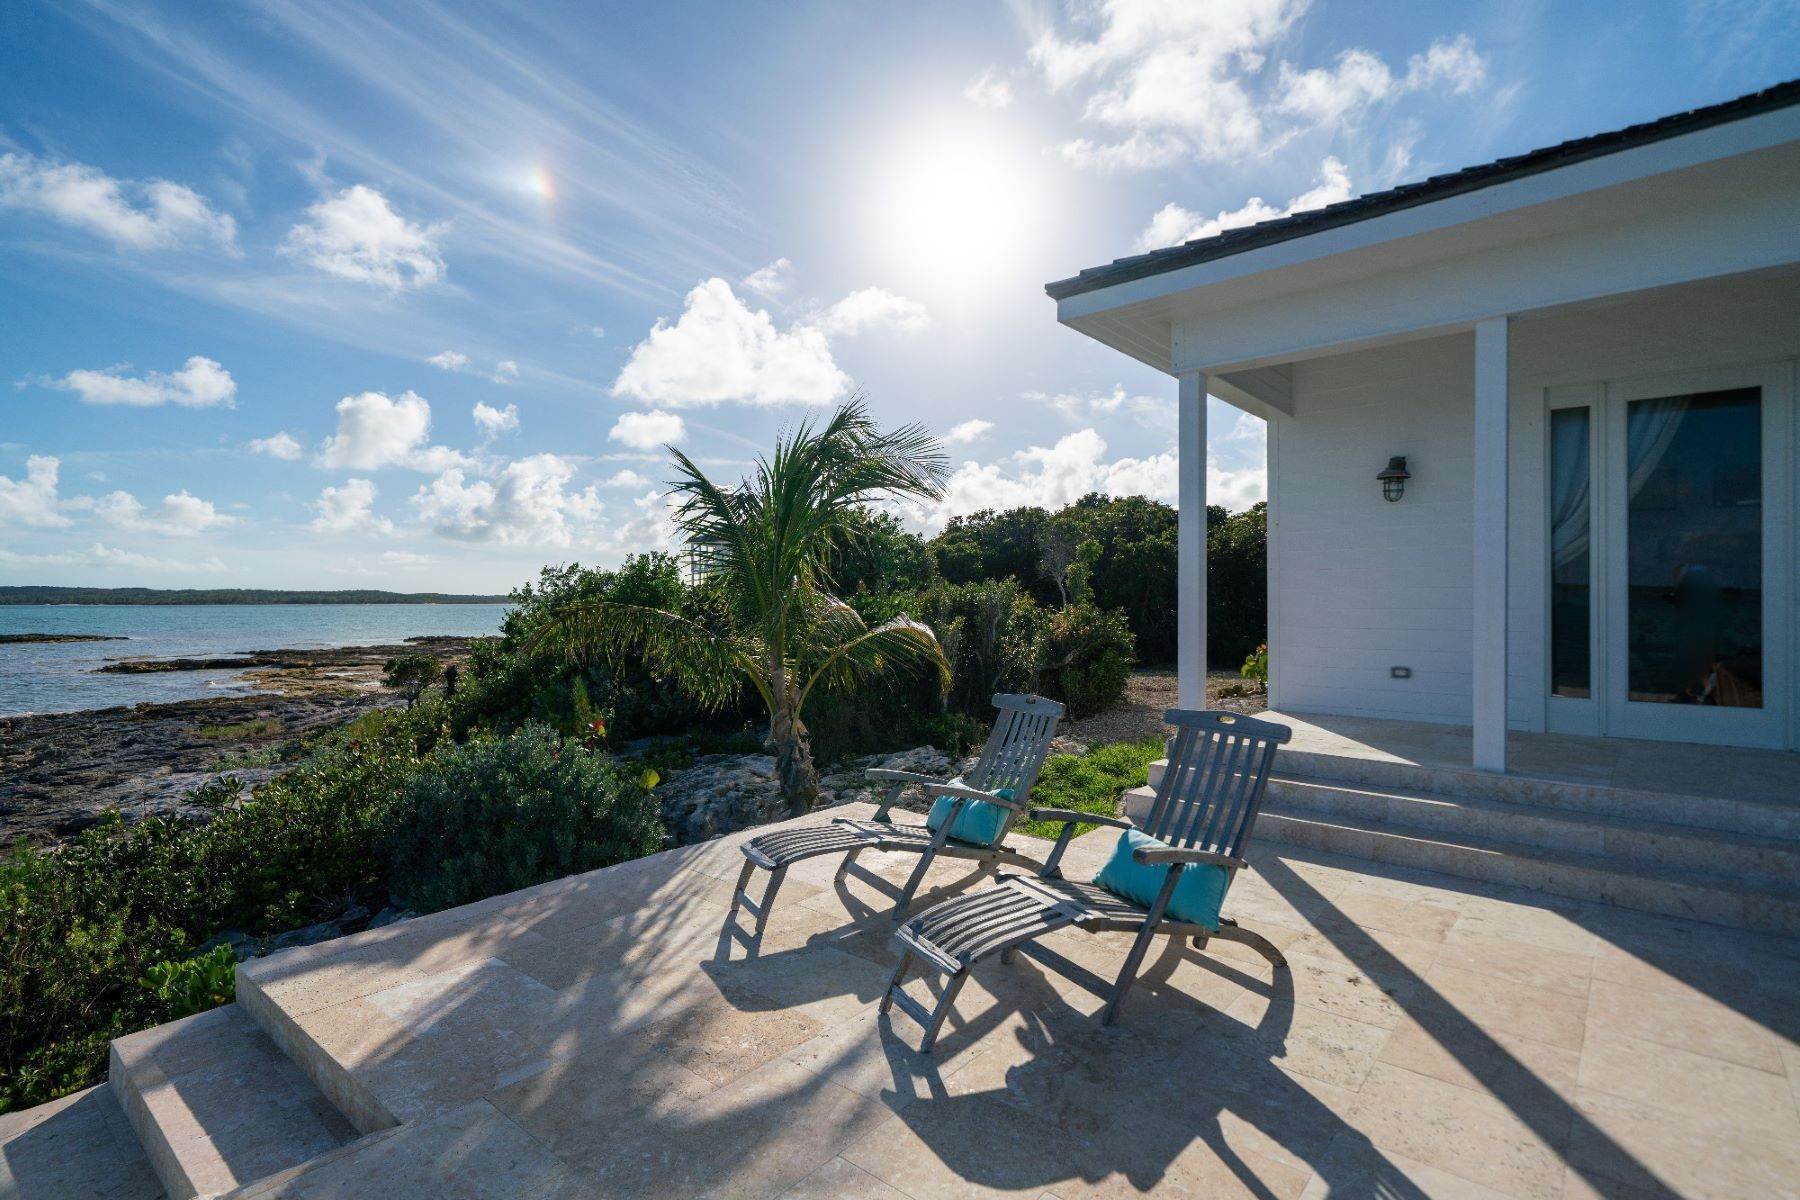 13. Private Islands for Sale at Harbour Island, Eleuthera, Bahamas